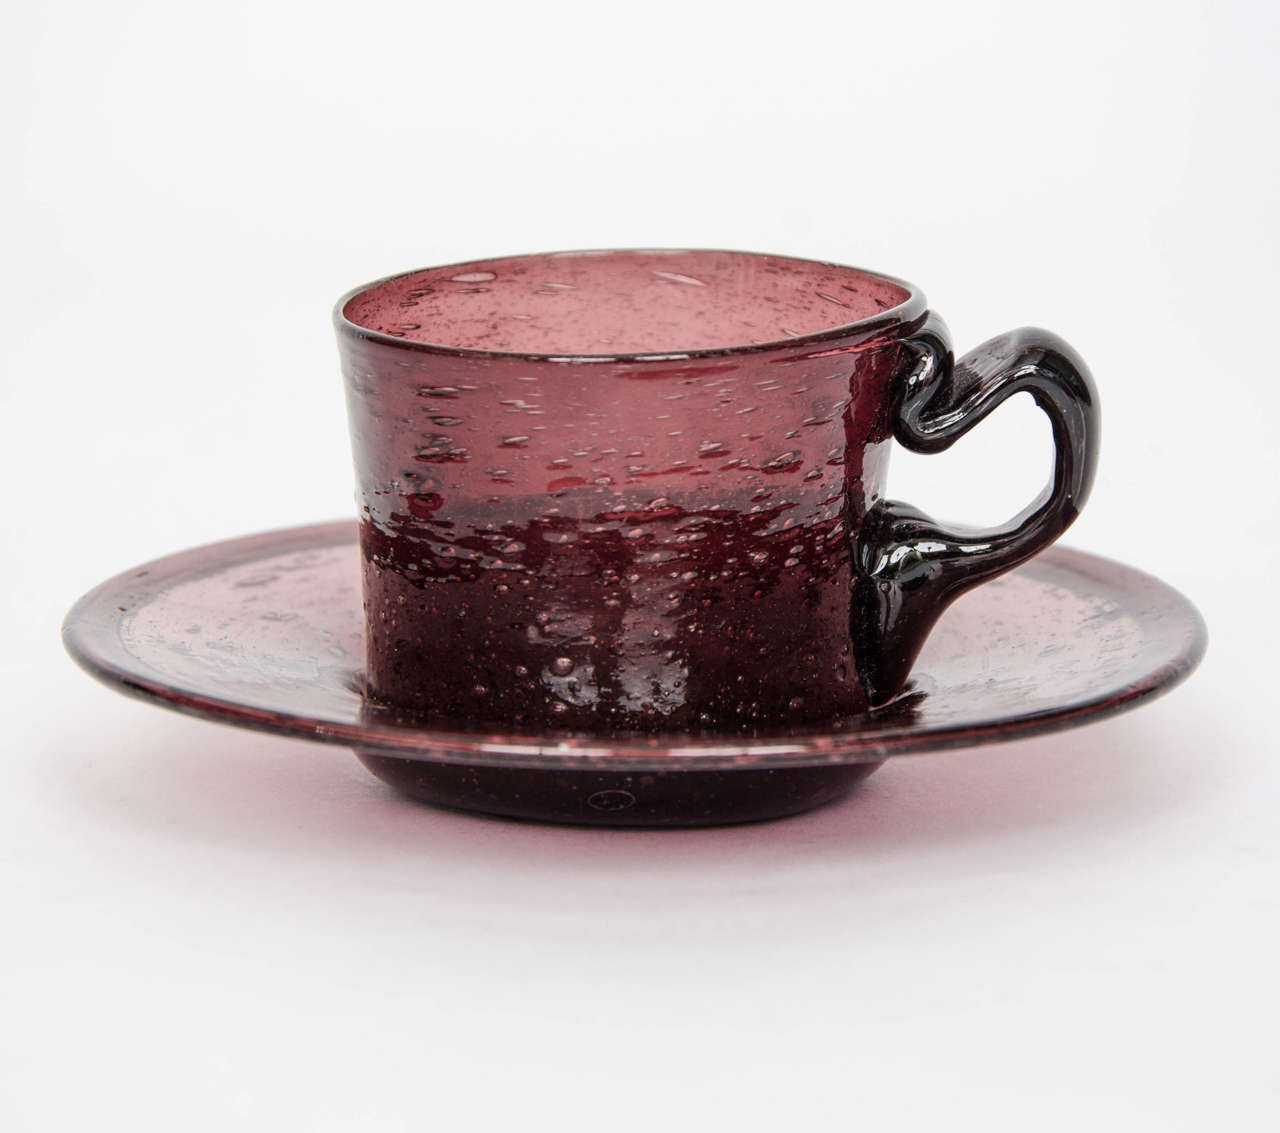 This is a hand blown, glass, cup and saucer made from an amethyst colored glass and dating to the English Georgian period, circa 1800.

Georgian glass cups and saucers are unusual and hard to find.

This one is particularly attractive being made